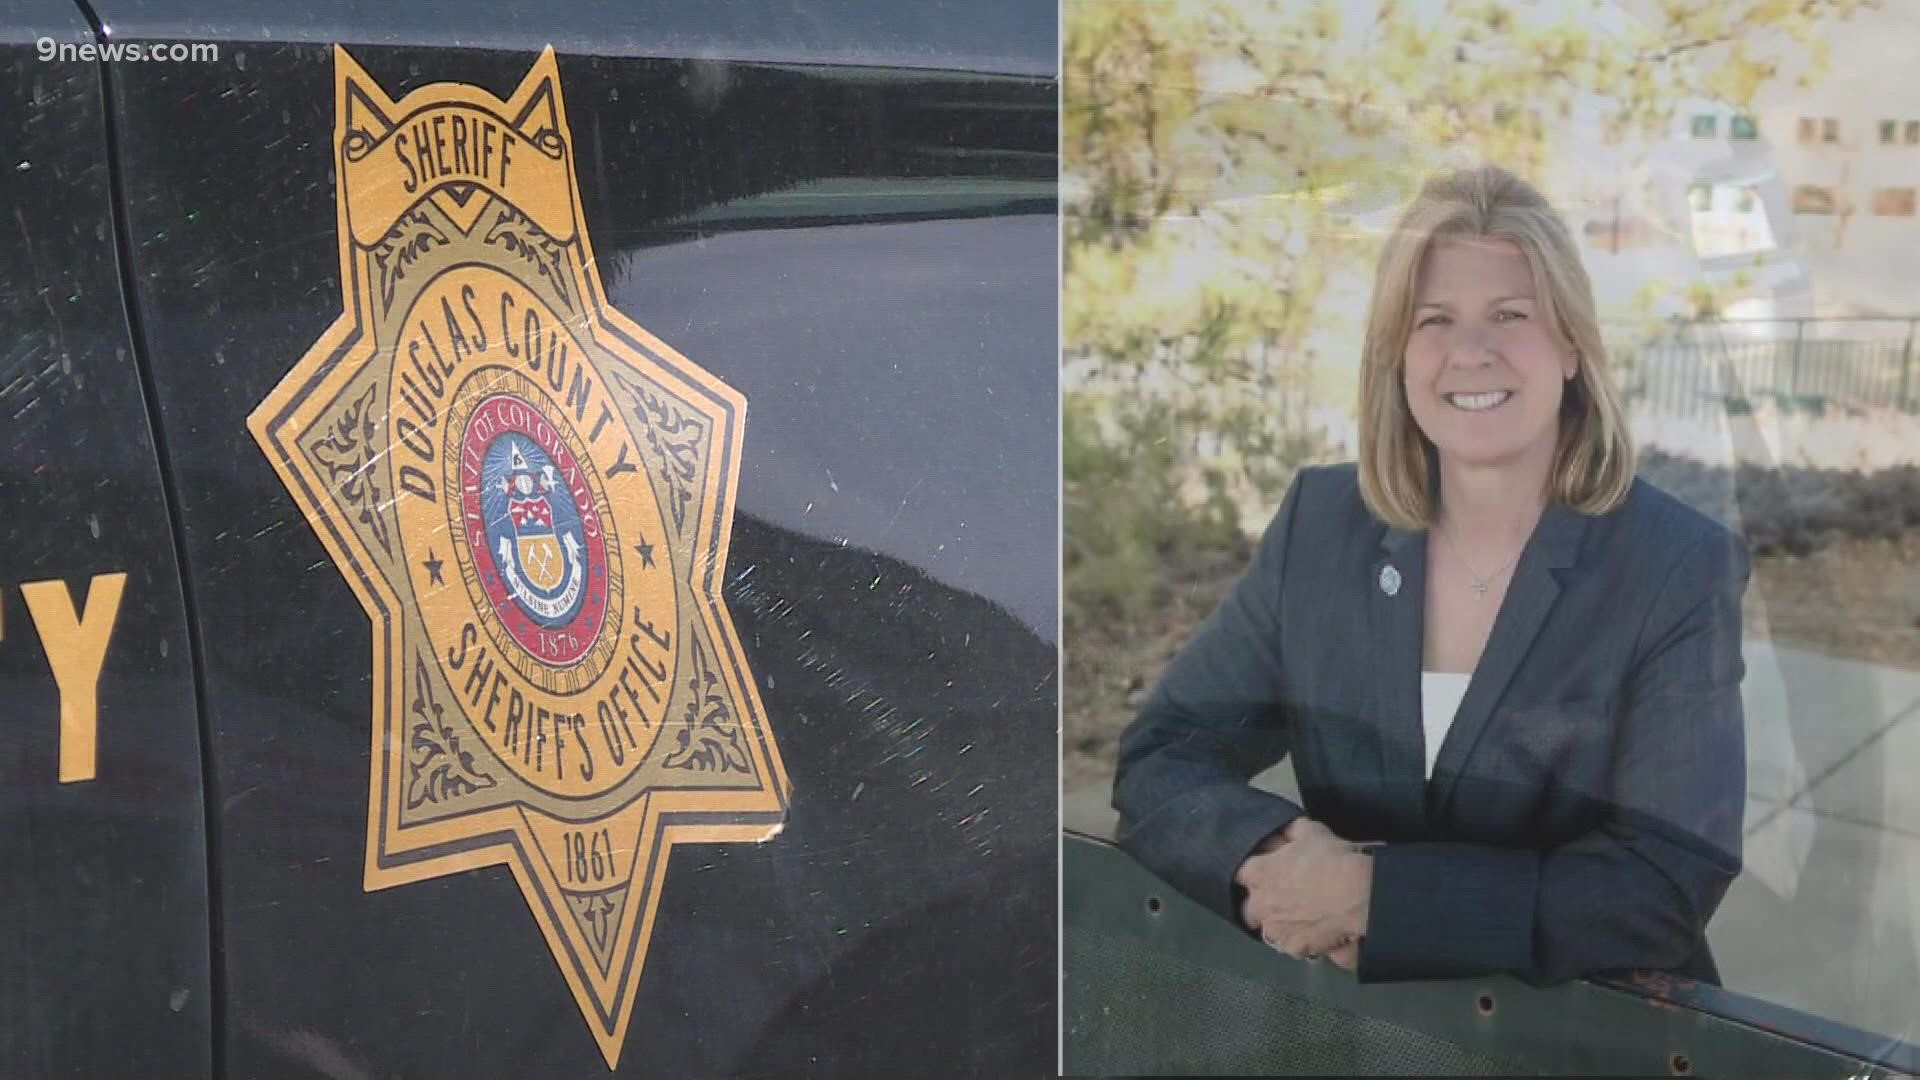 A candidate for Dougco sheriff, Holly Kluth, is the subject of a warning issued by prosecutors who say her testimony may not be credible in a court case.